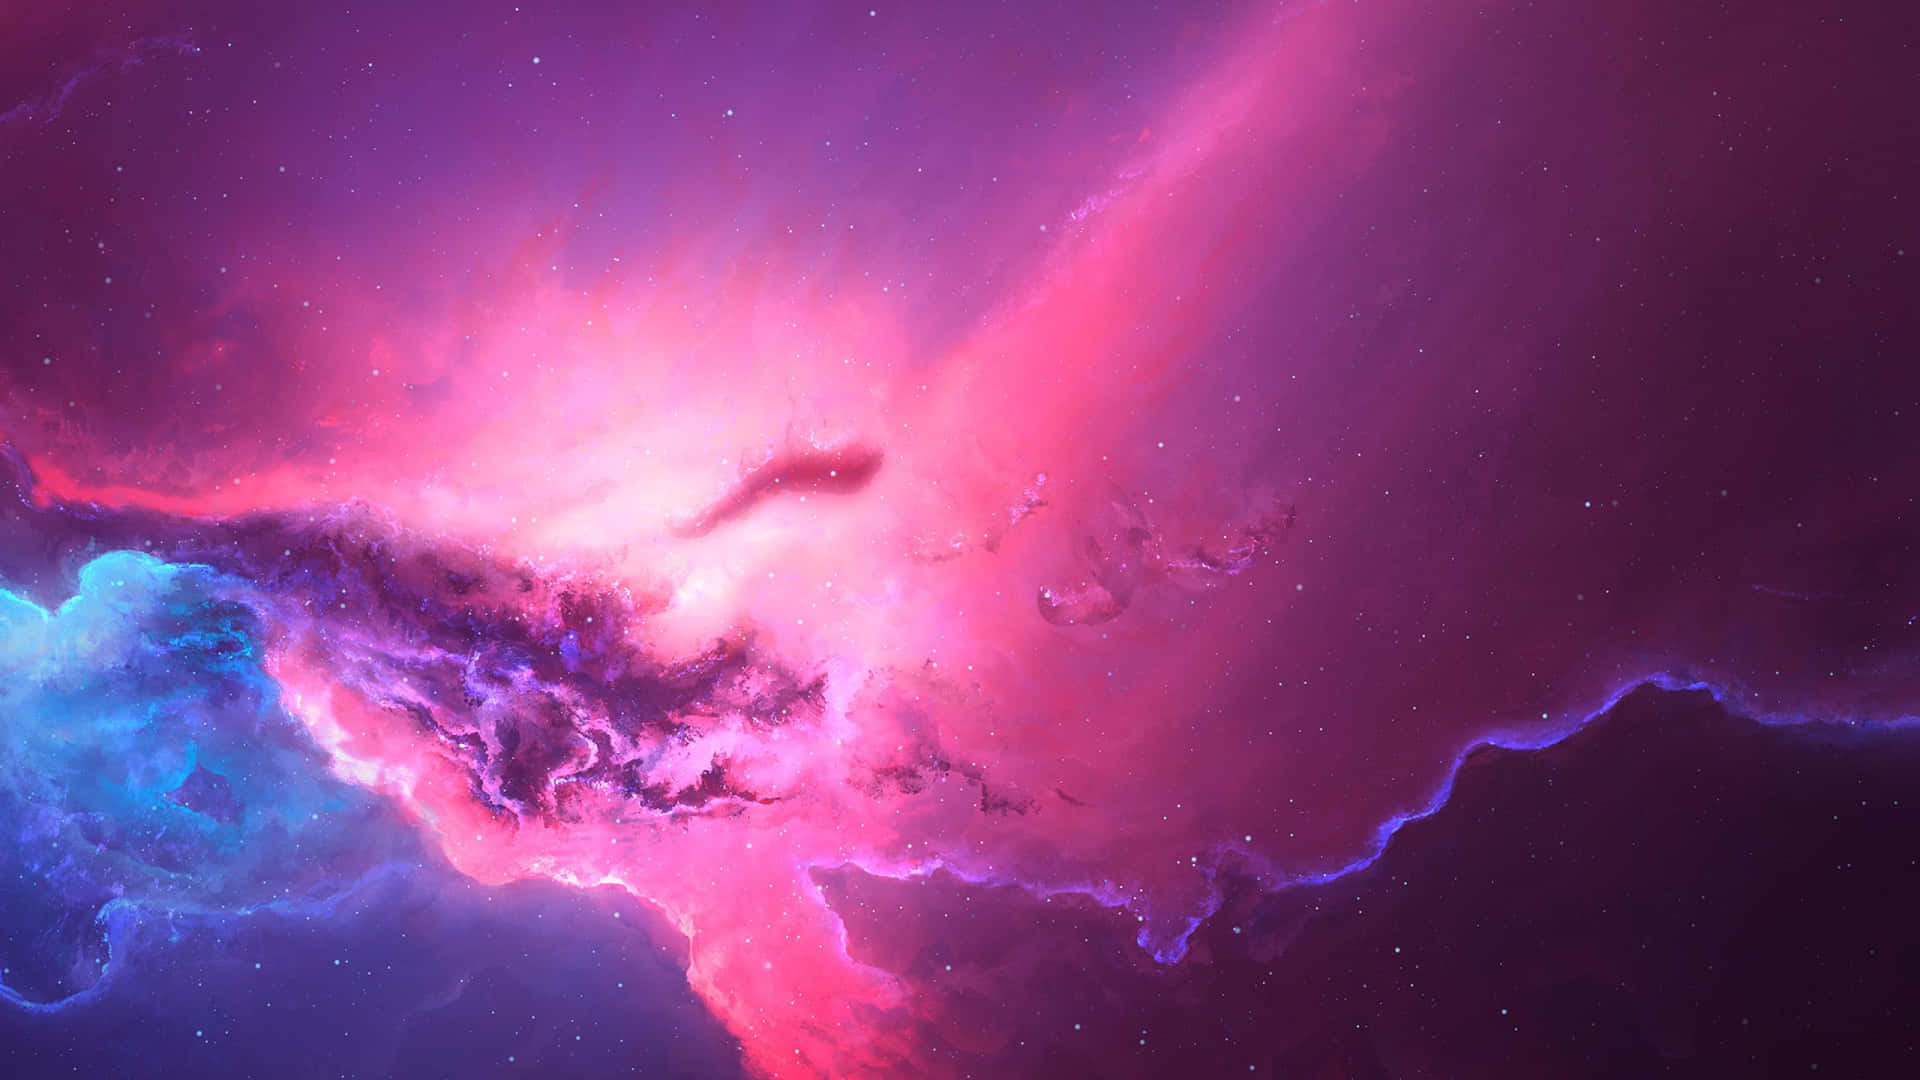 A Purple And Pink Nebula In Space